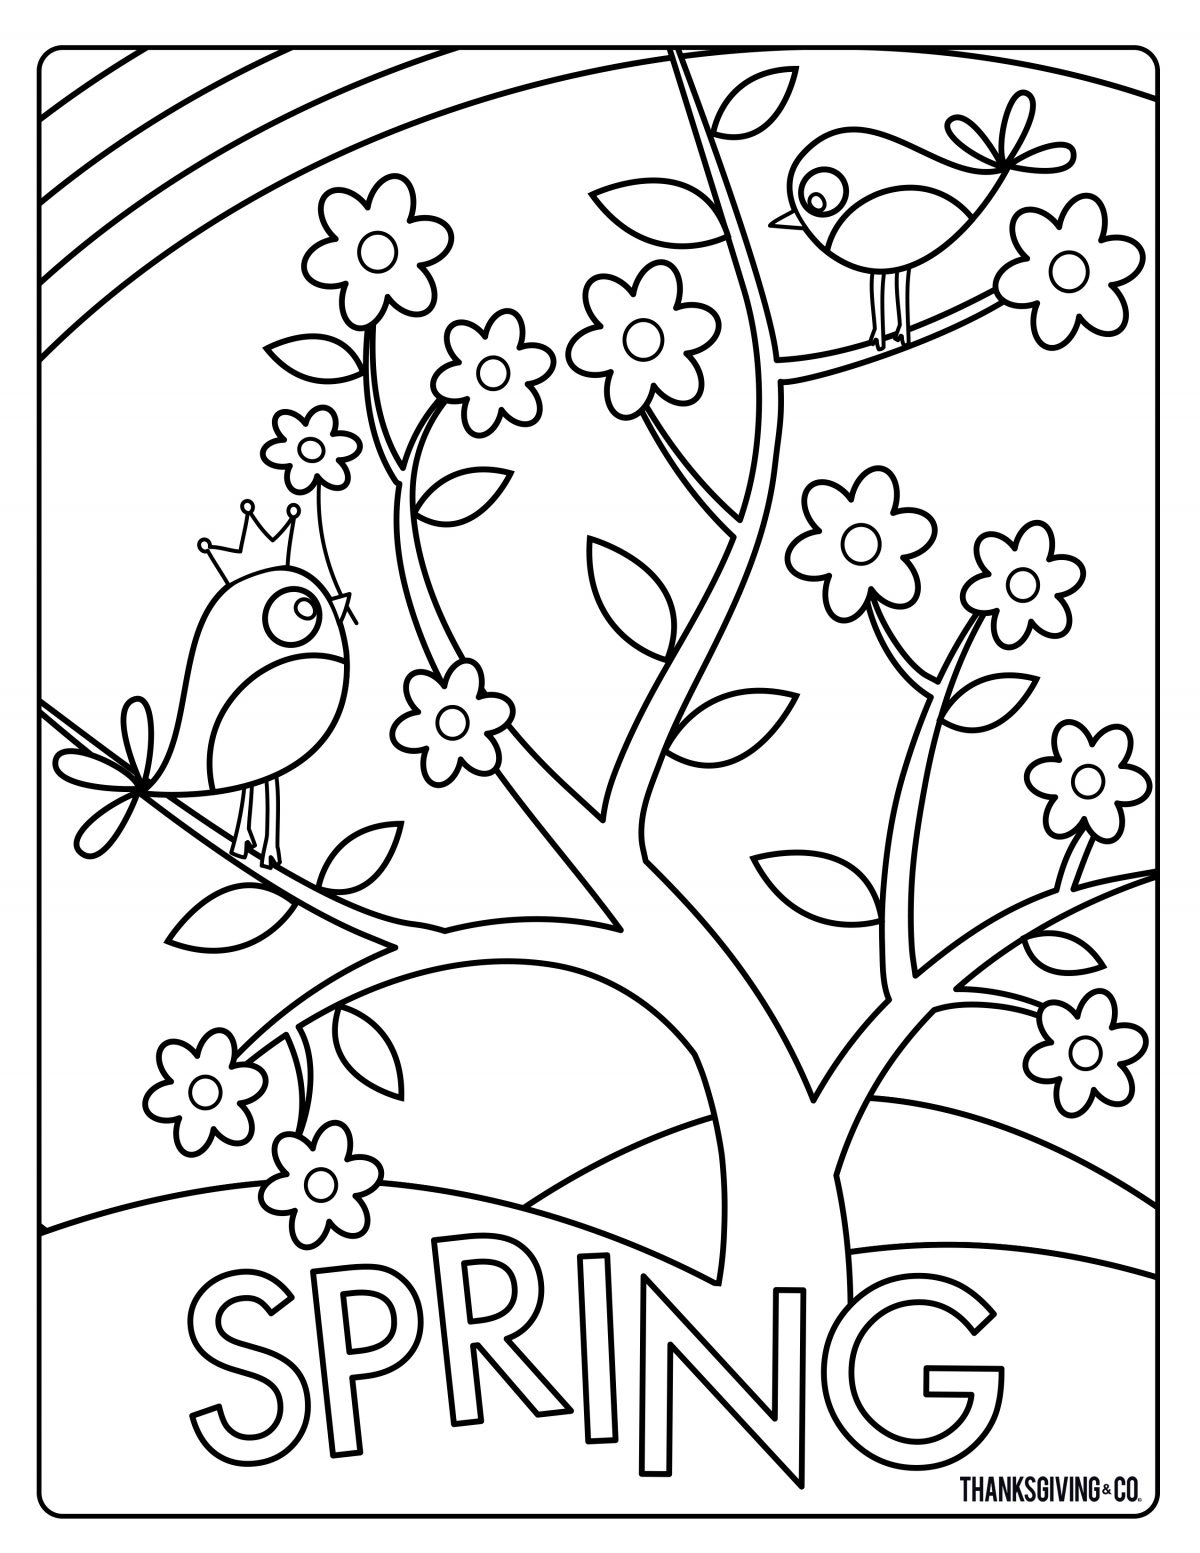 Spring coloring page - tree